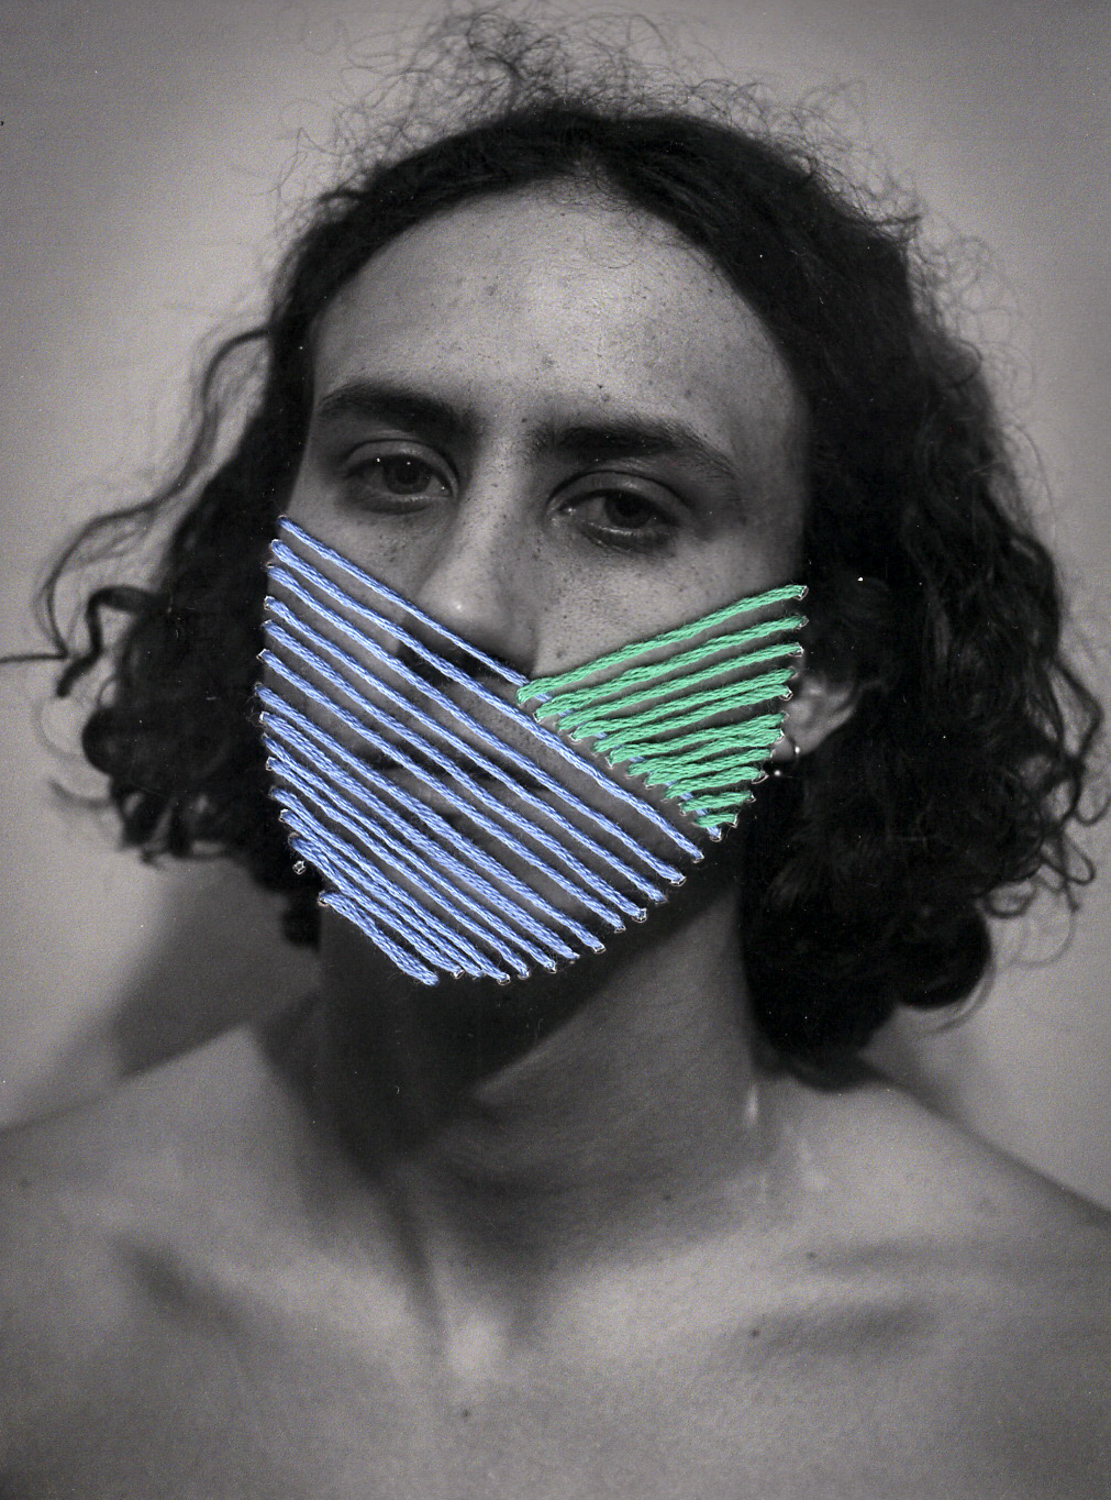 Black and white self-portrait with embroidery sewn over mouth in mask-like fashion.